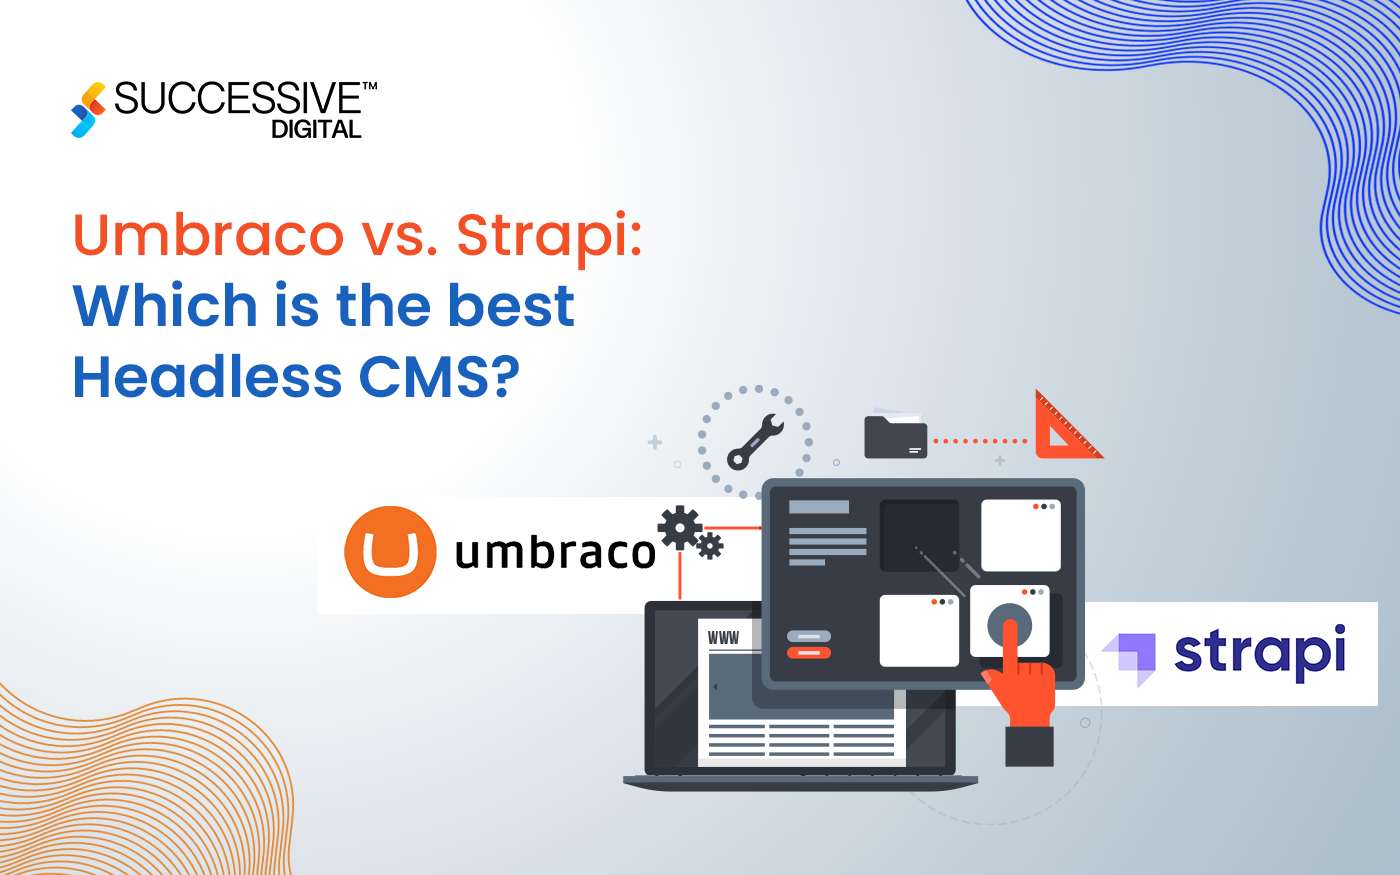 Umbraco vs. Strapi: Which Should You Choose as Your Open-source Headless CMS?